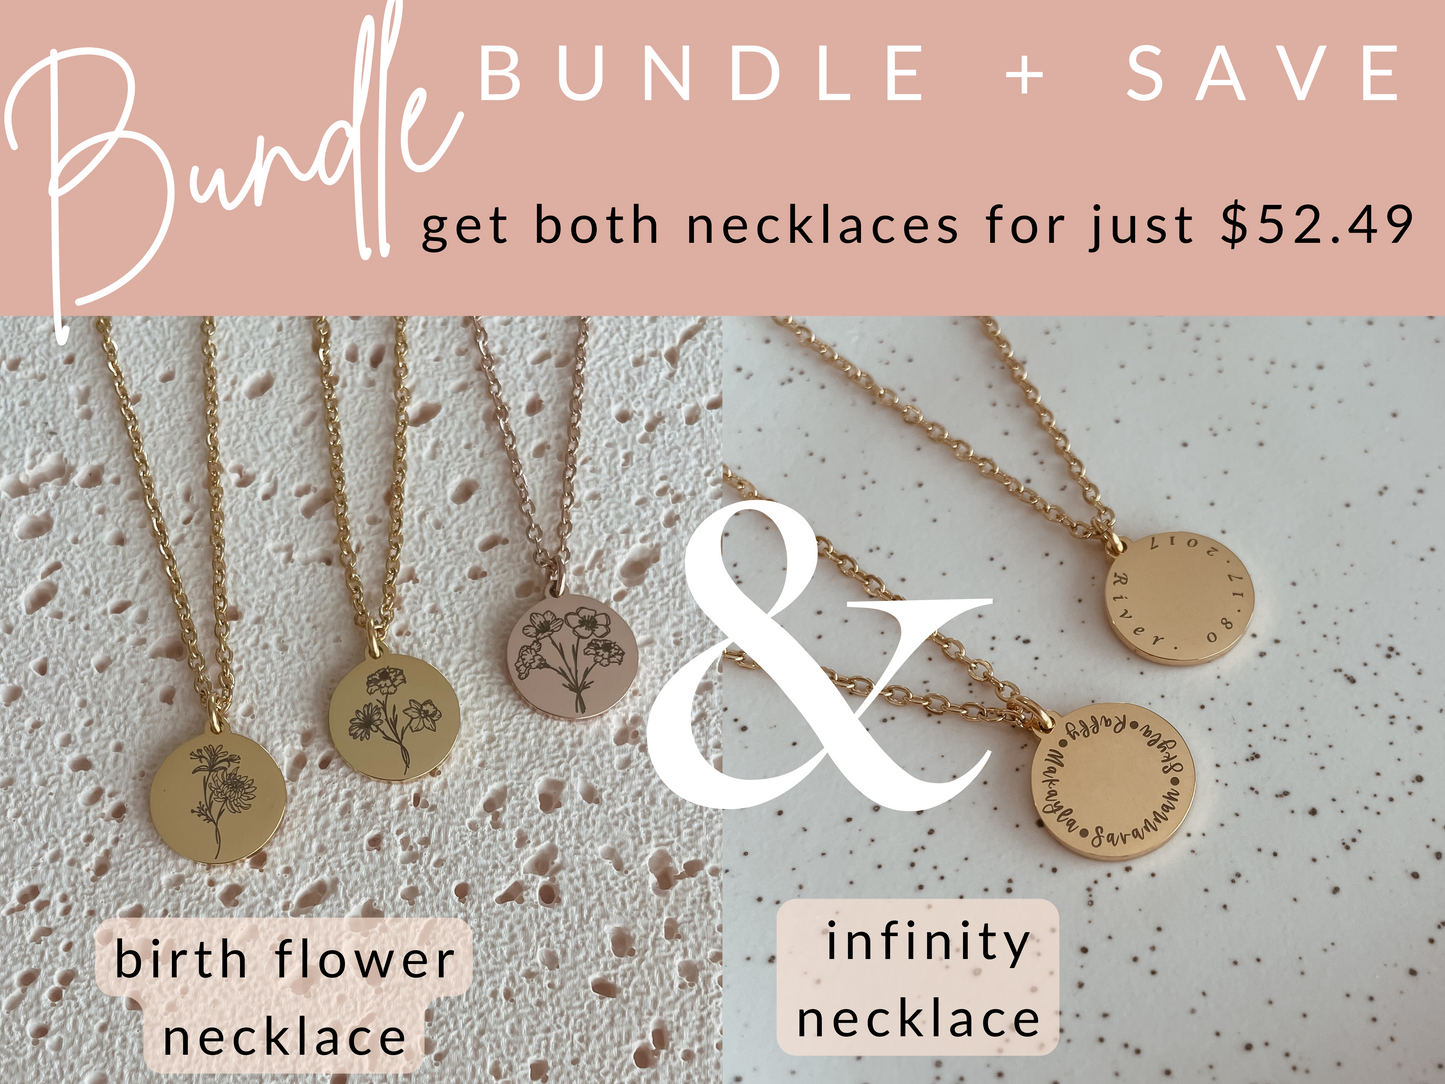 BUNDLE - Combined birth flower necklace AND Infinity necklace